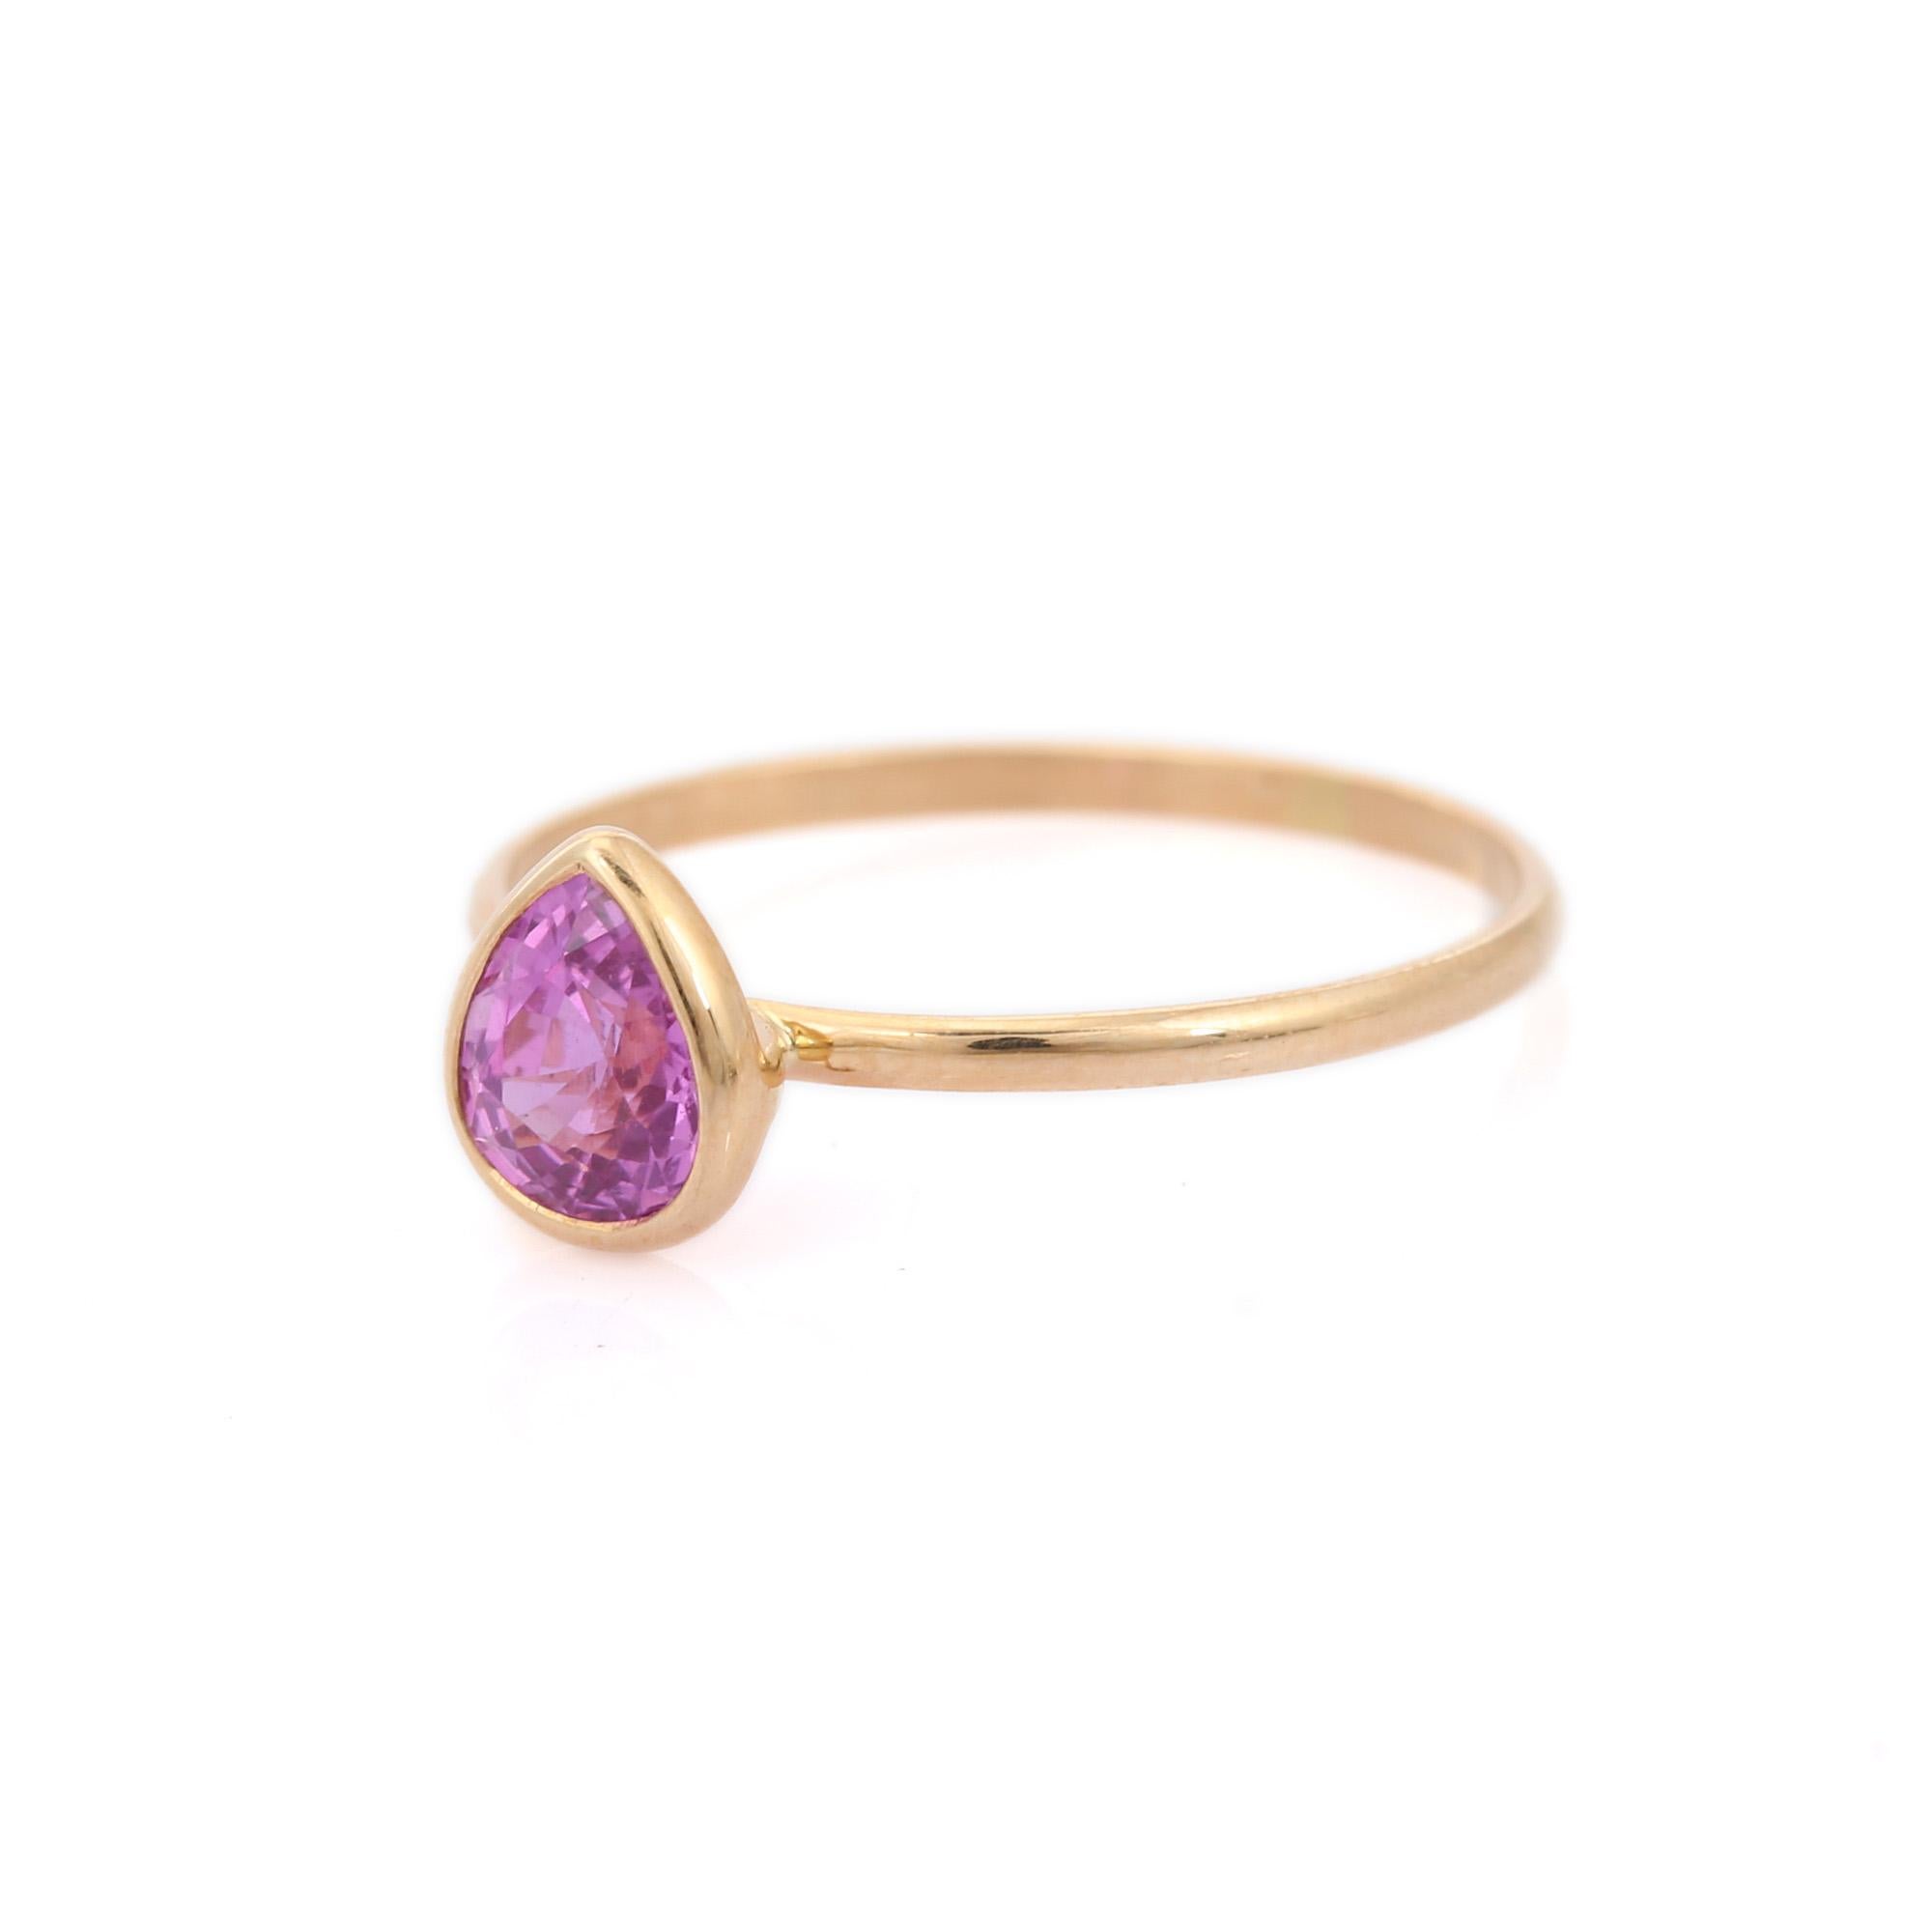 For Sale:  Pink Sapphire Pear Cut Dainty Solitaire Ring in 18K Yellow Gold 5